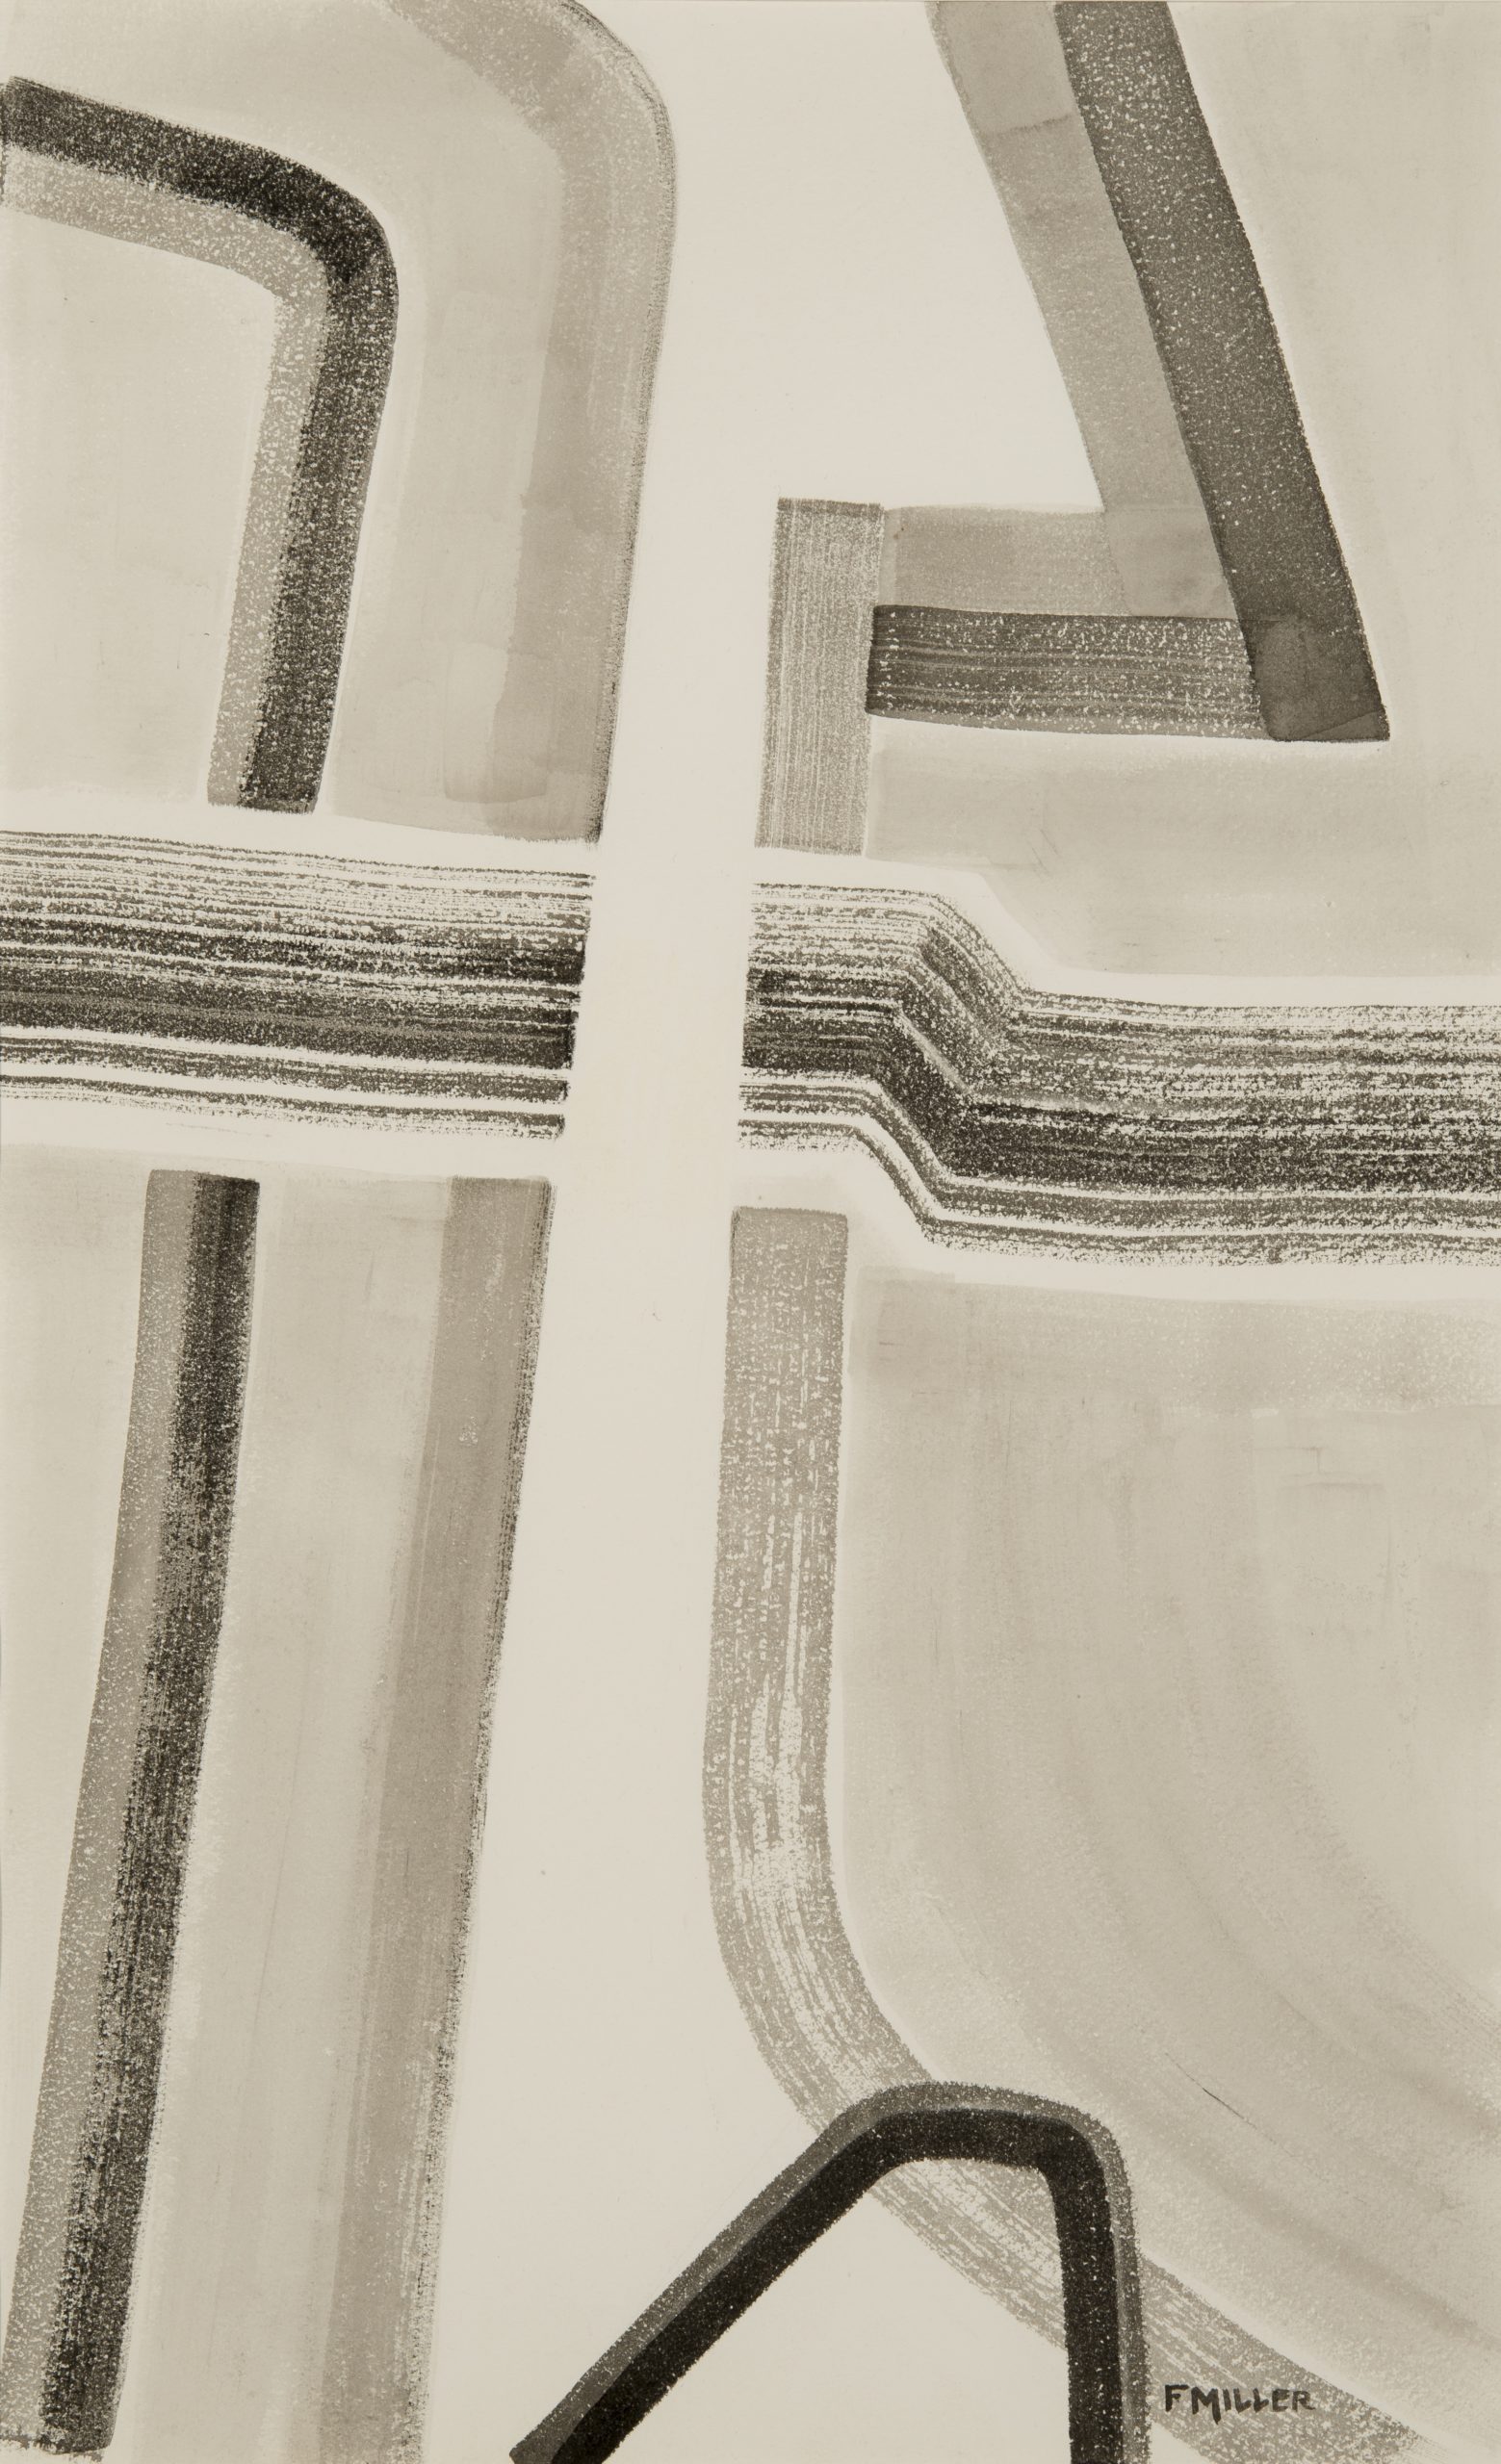 
		                					Florence Miller Pierce		                																	
																											<i>Untitled, circa 1950s,</i>  
																																								1950s, 
																																								ink on paper, 
																																								29 x 21 x 1 inches 
																								
		                				